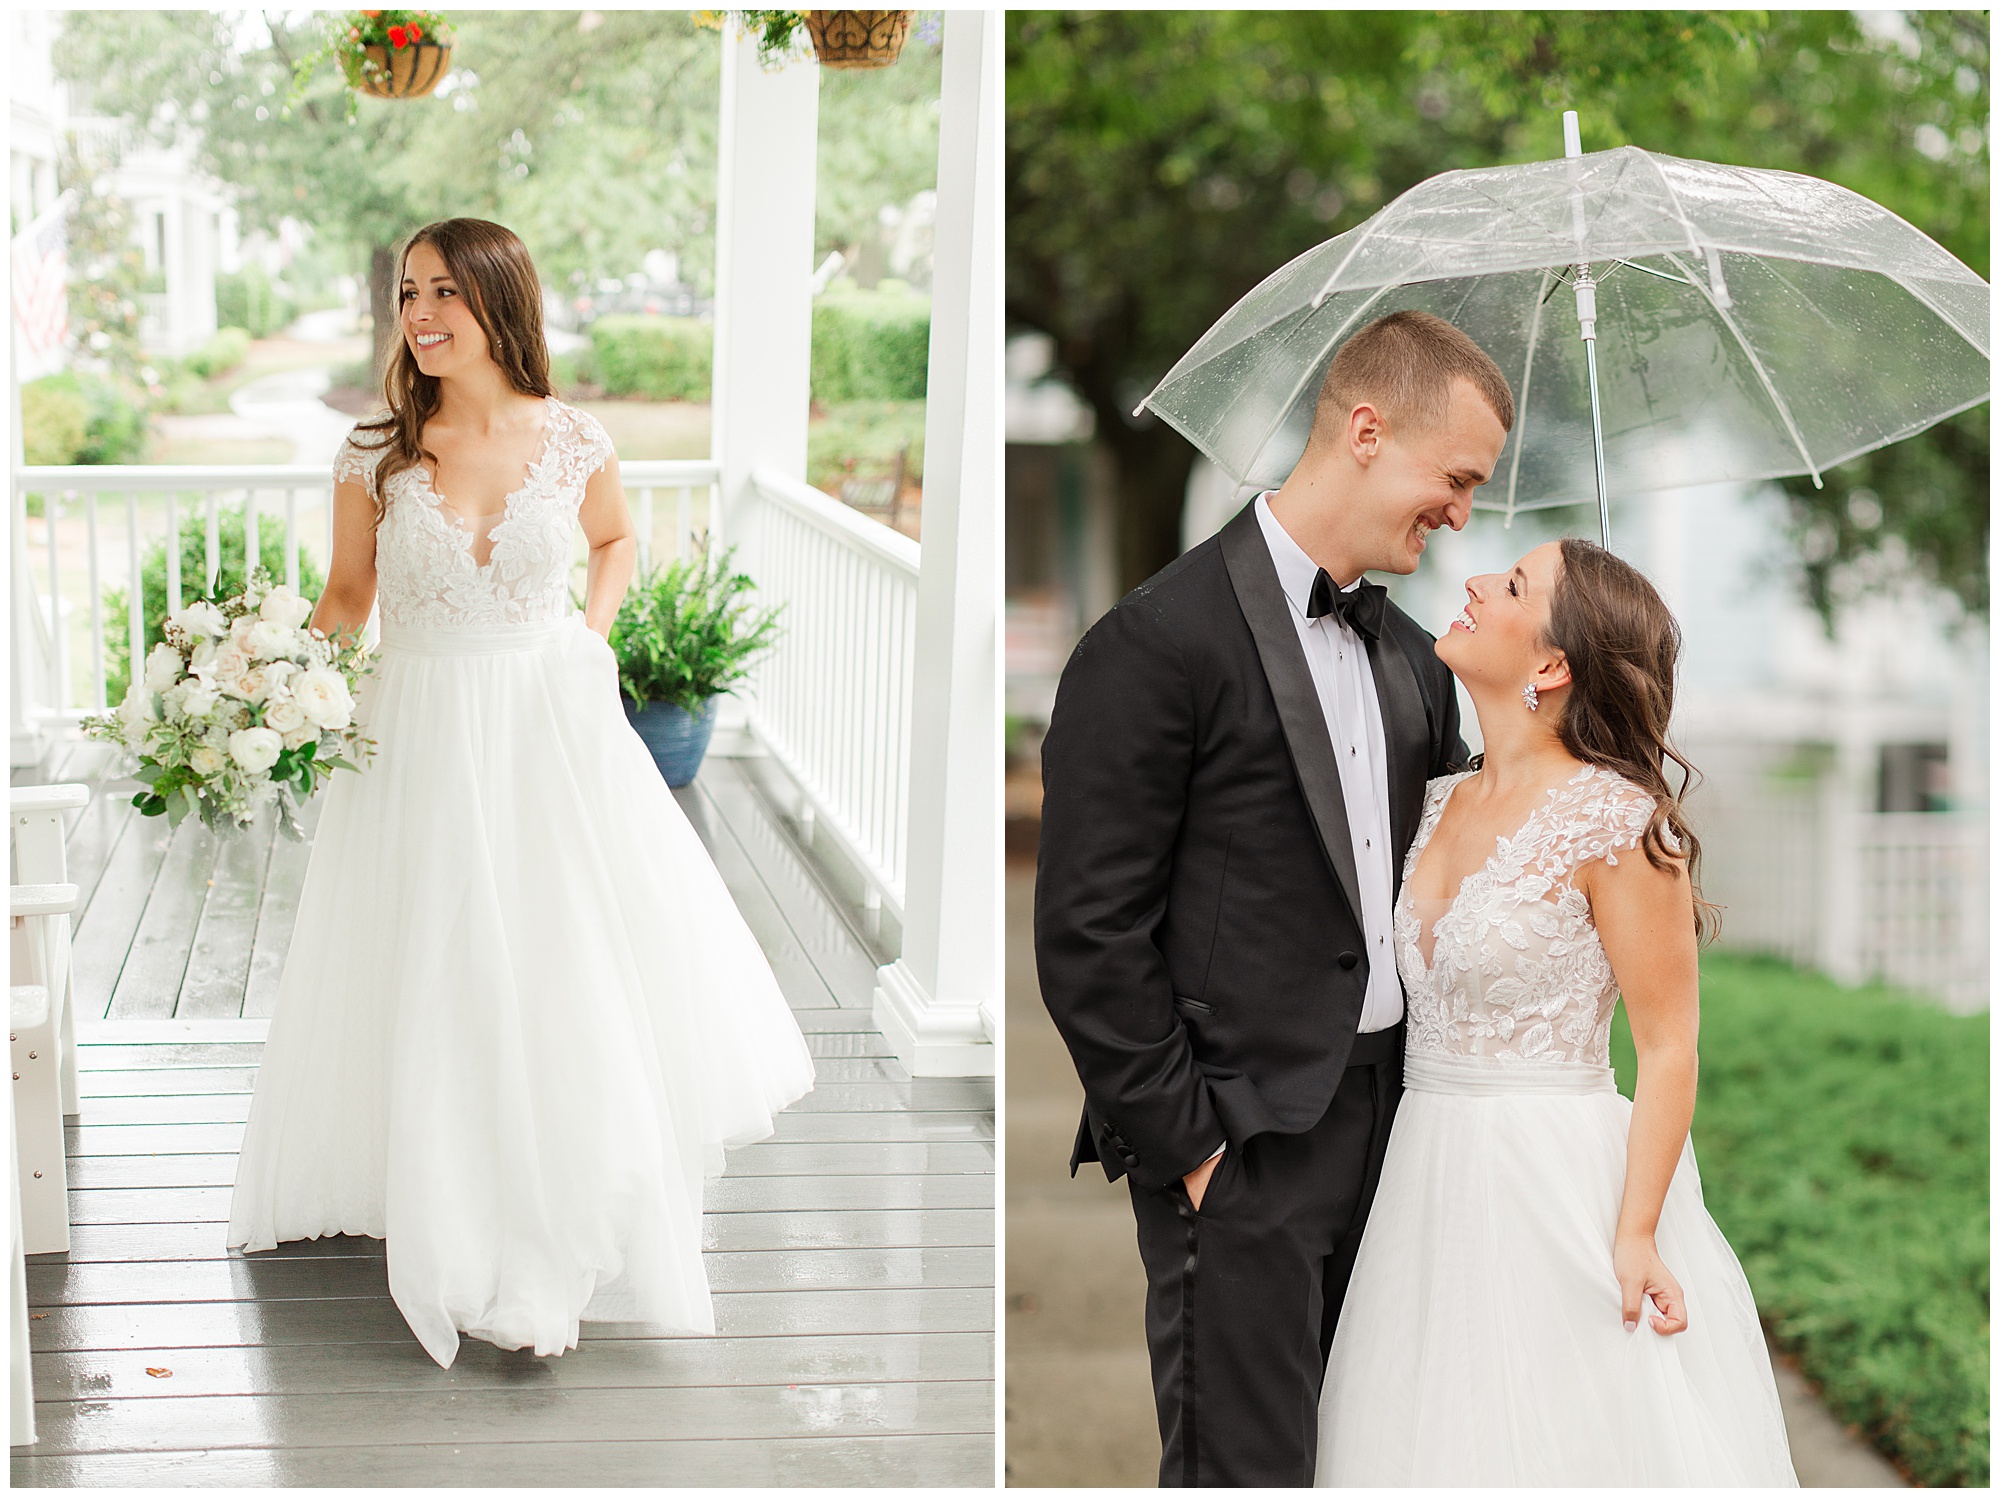 Danielle & Chris, East Beach wedding, Hampton Roads weddings, Kelley Stinson Photography, lace and tulle bridal gown